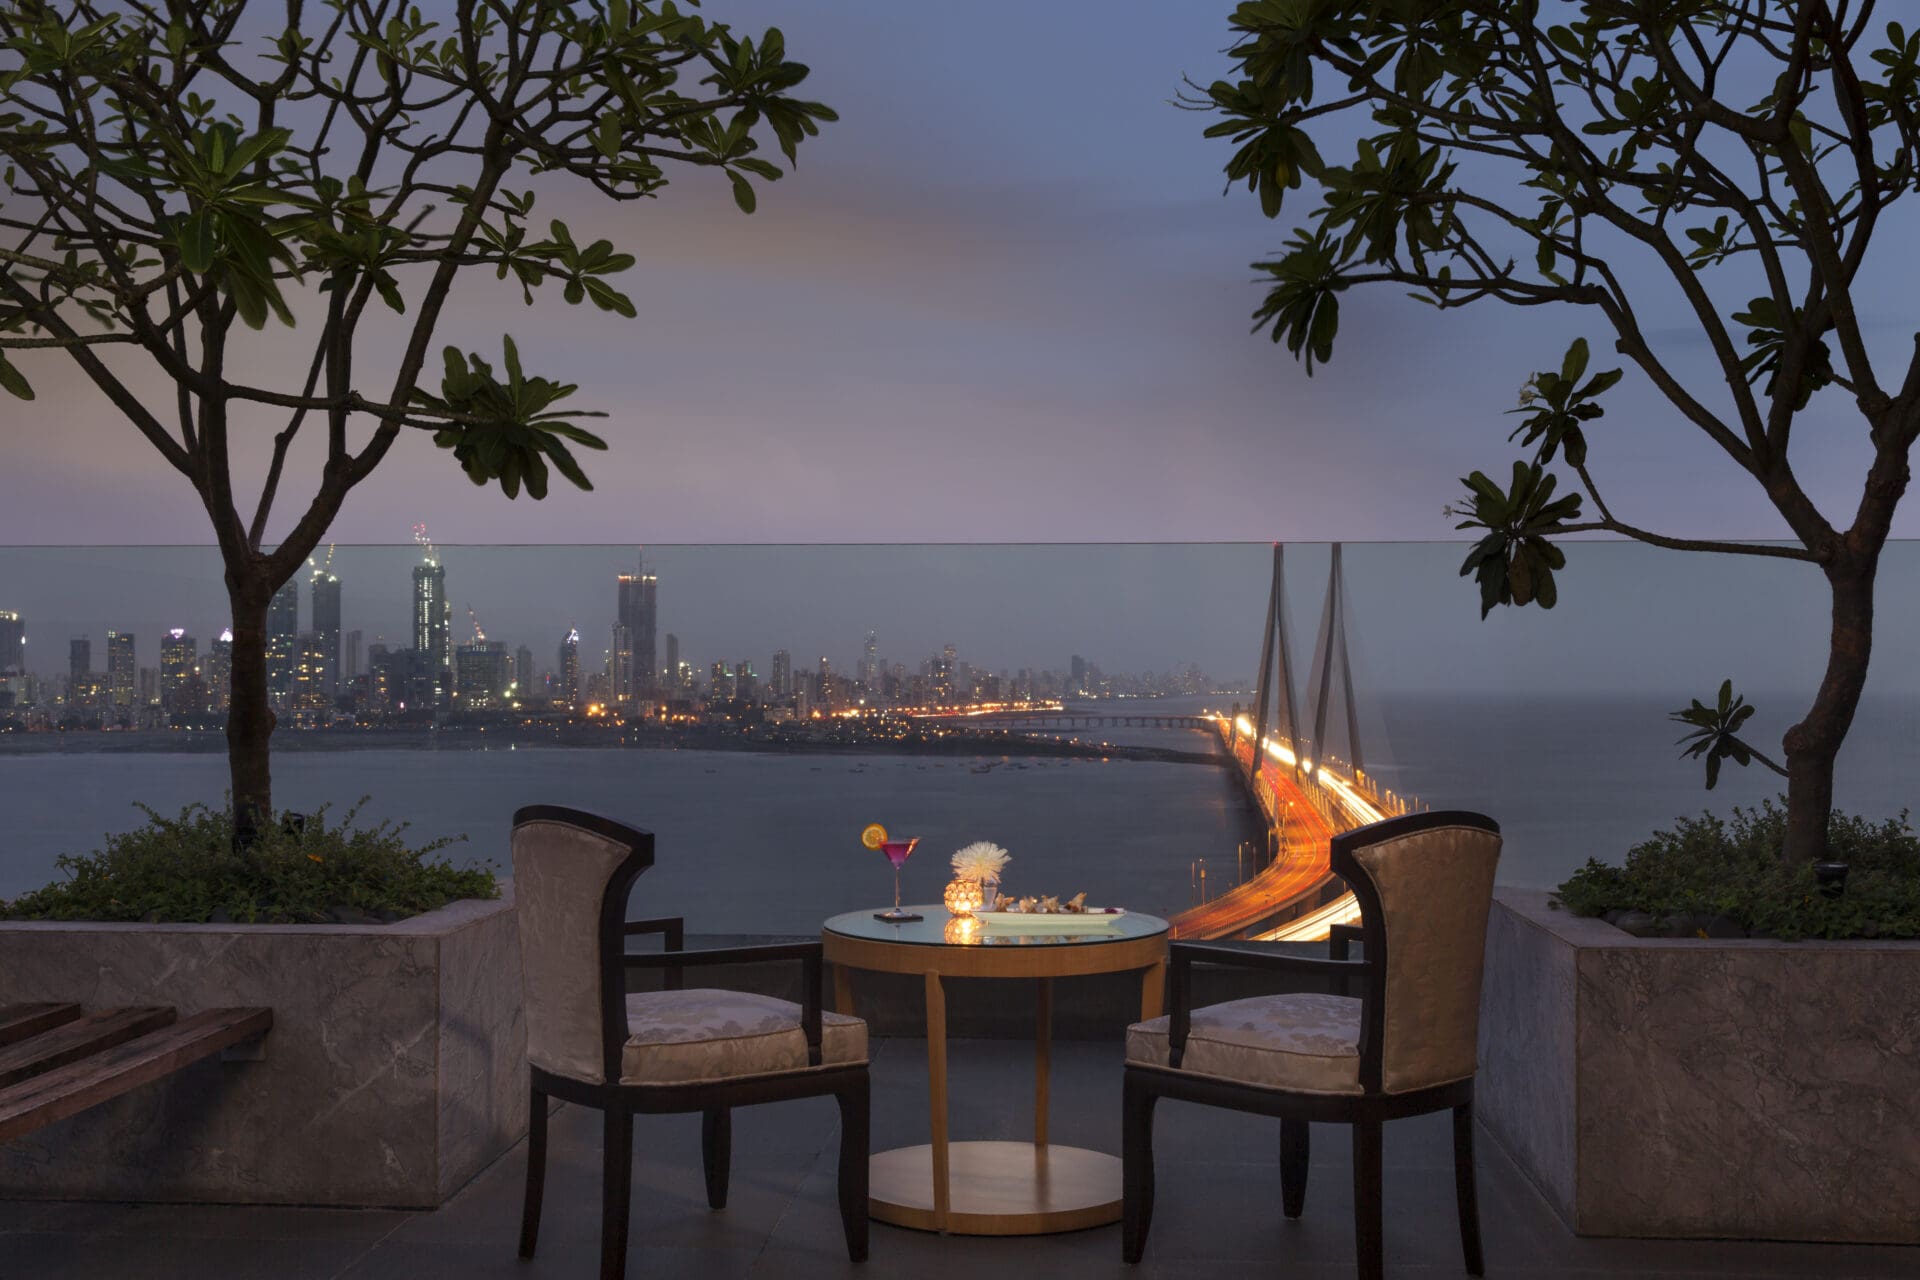 The best hotels in Mumbai | A view of the Sealink at dusk from the terrace at Taj Lands End, with a table and two chairs and two potted trees in the foreground.